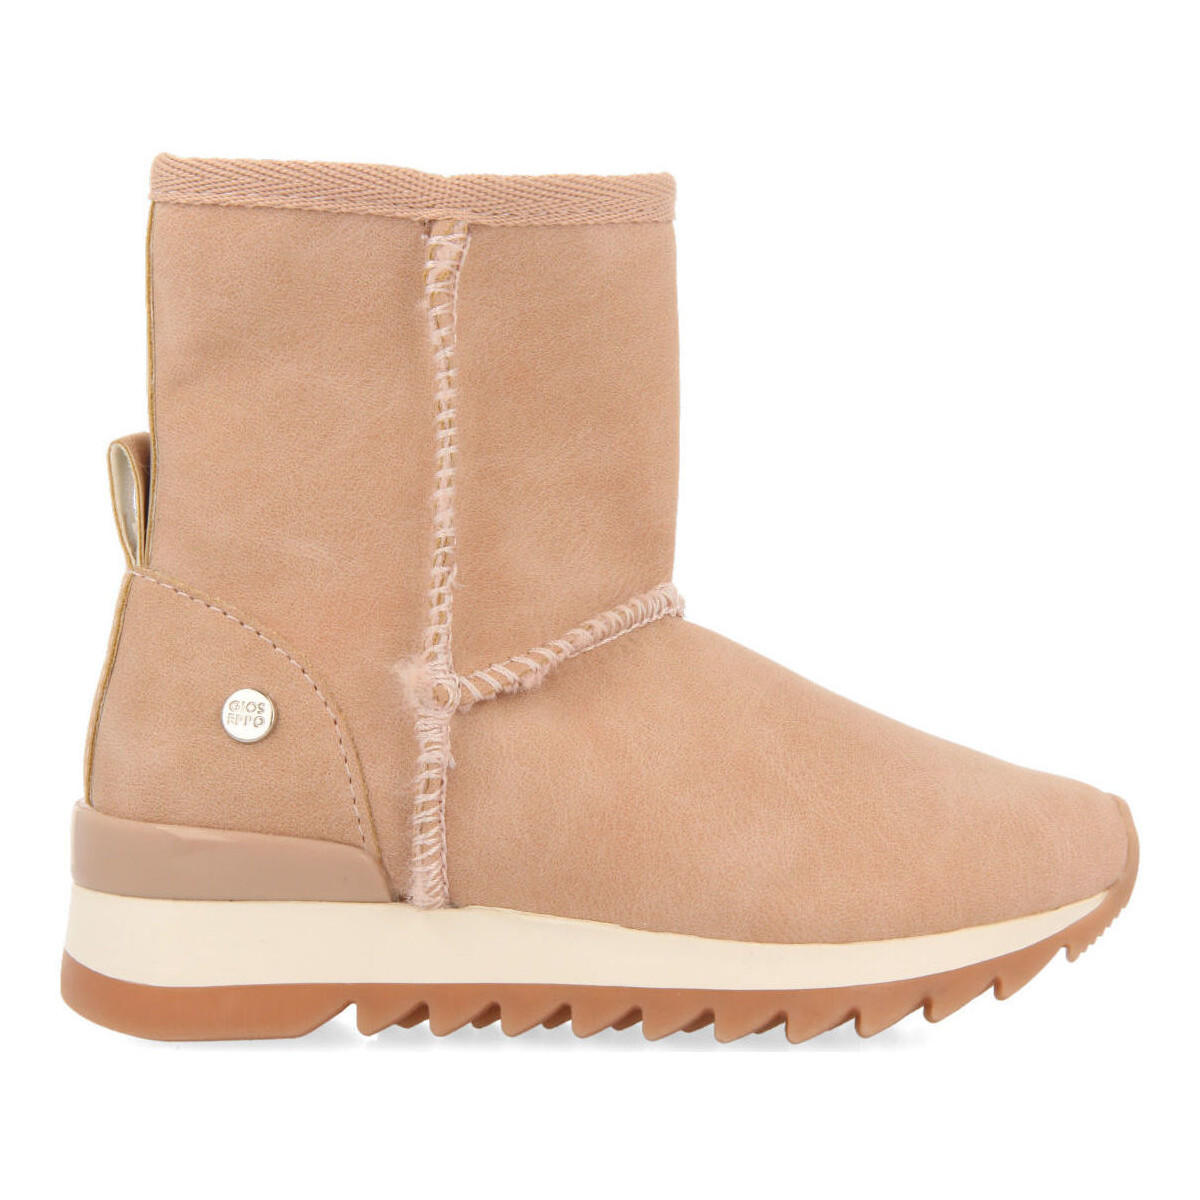 Chaussures Fille Bottes Gioseppo nijlen Rose